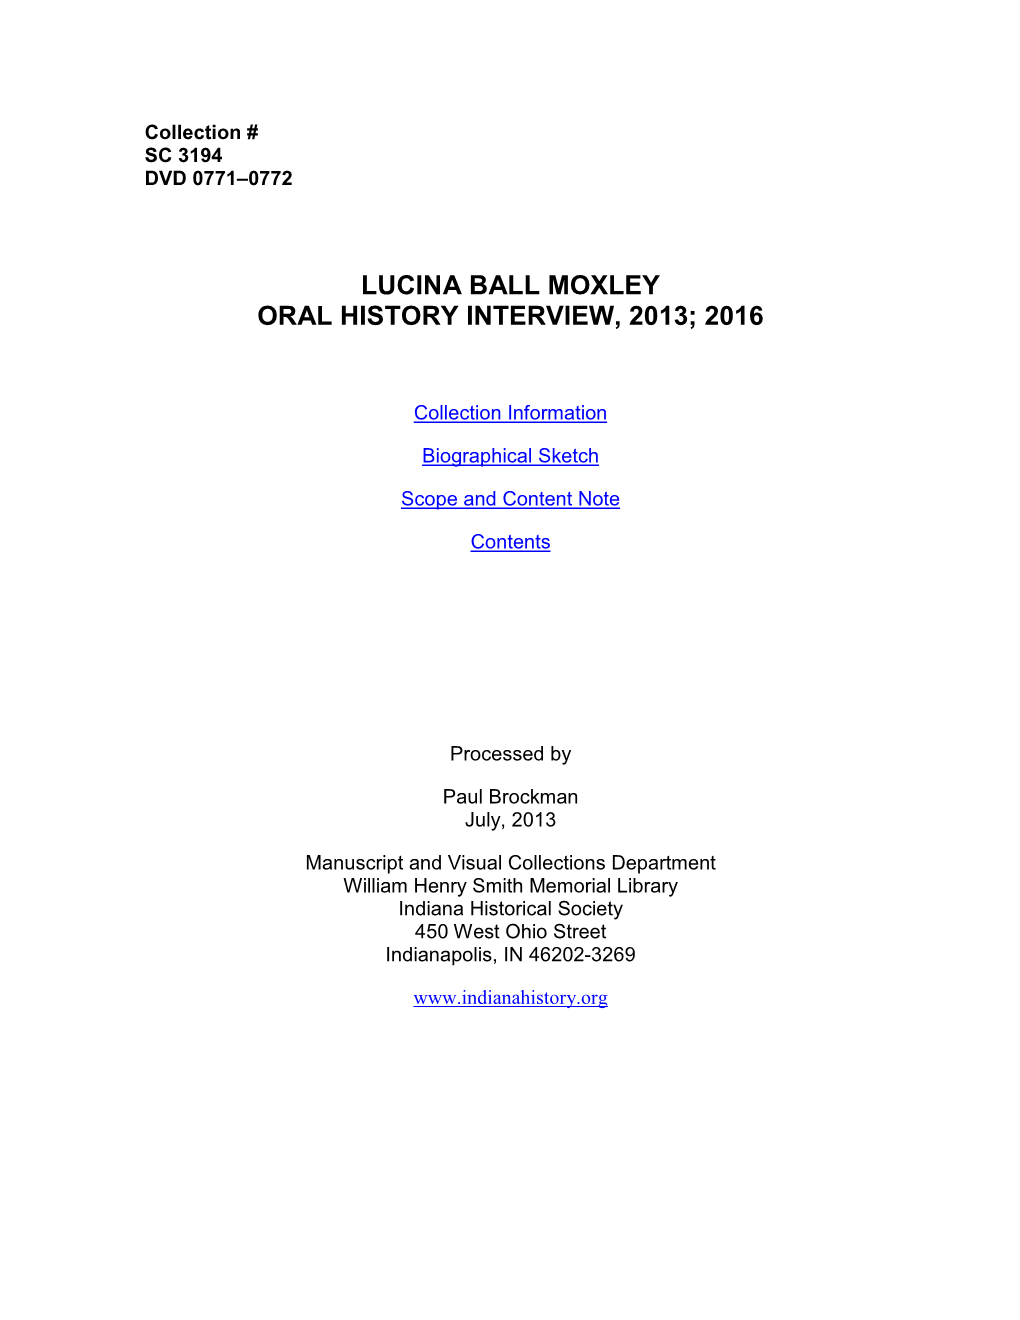 Lucina Ball Moxley Oral History Interview, 2013; 2016